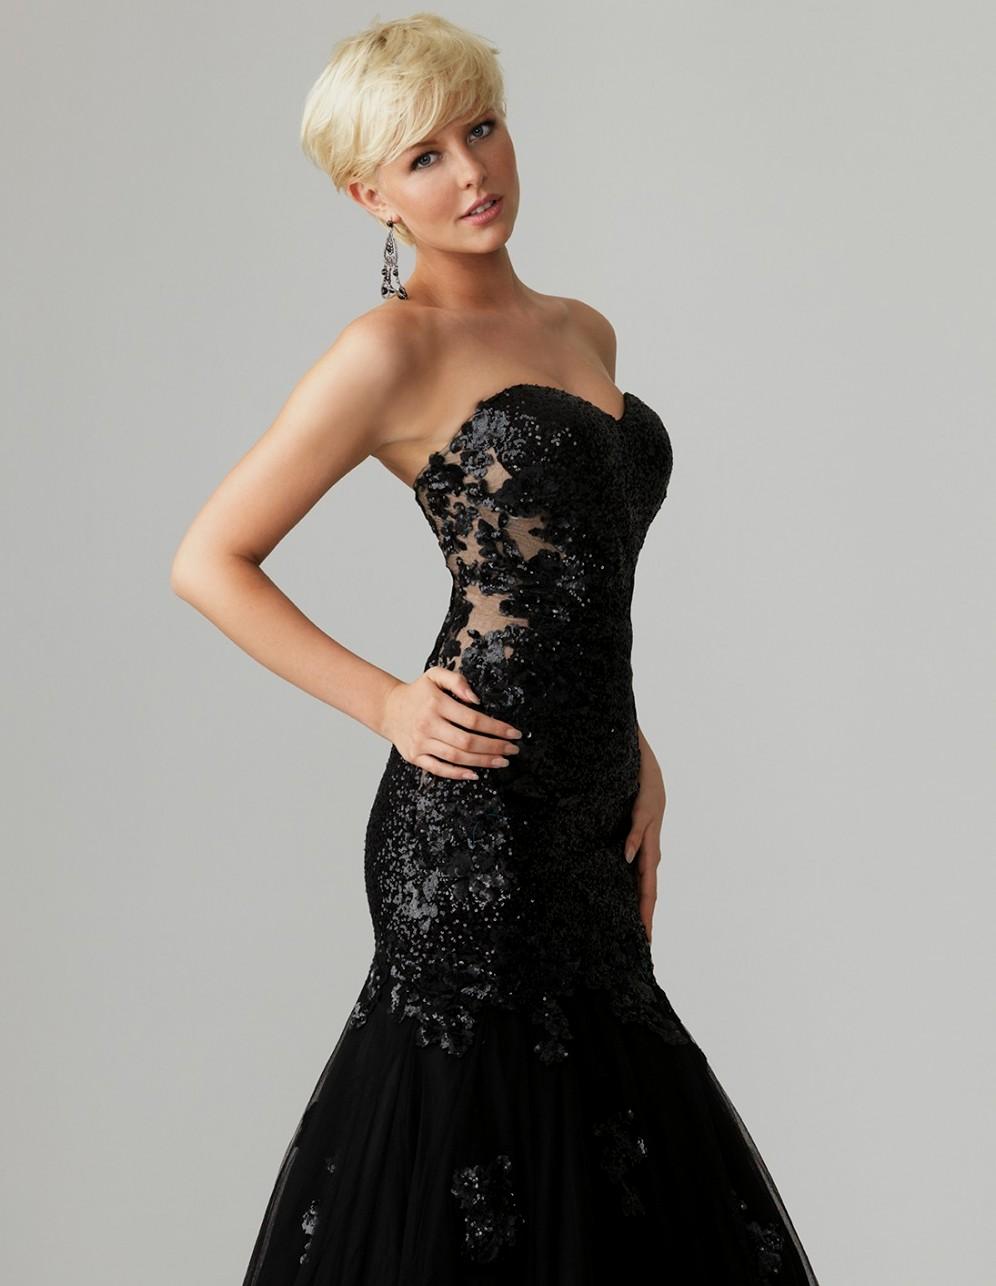 Prom Dresses All Black : Be Beautiful And Chic